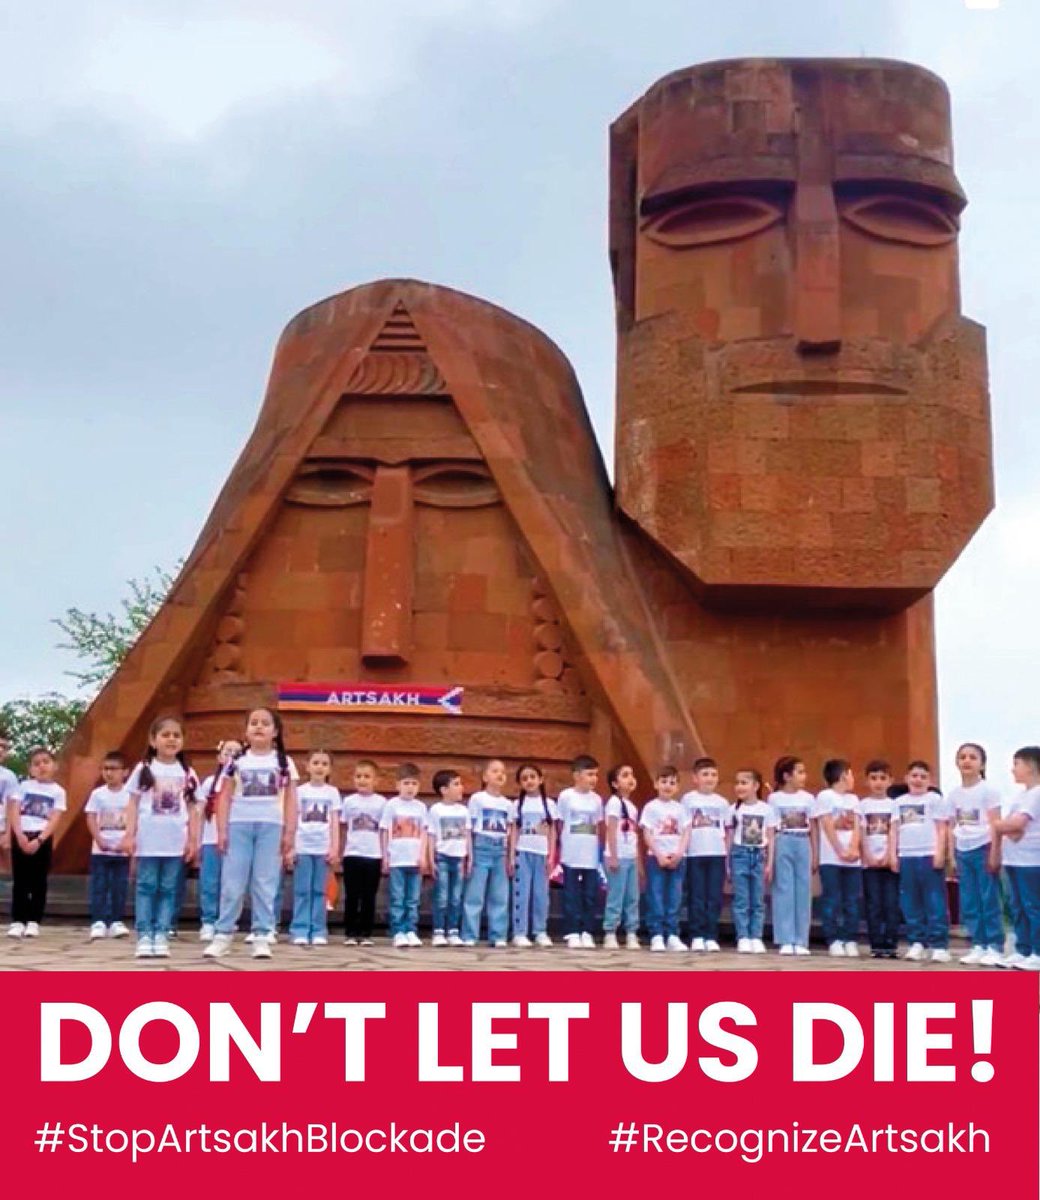 International Law is on the side of the 120,000 Armenians of Nagorno-Karabakh in imminent danger of extermination
The order of the International Court of Justice of 22/02/23 demanding the immediate lifting of the blockade testifies to this